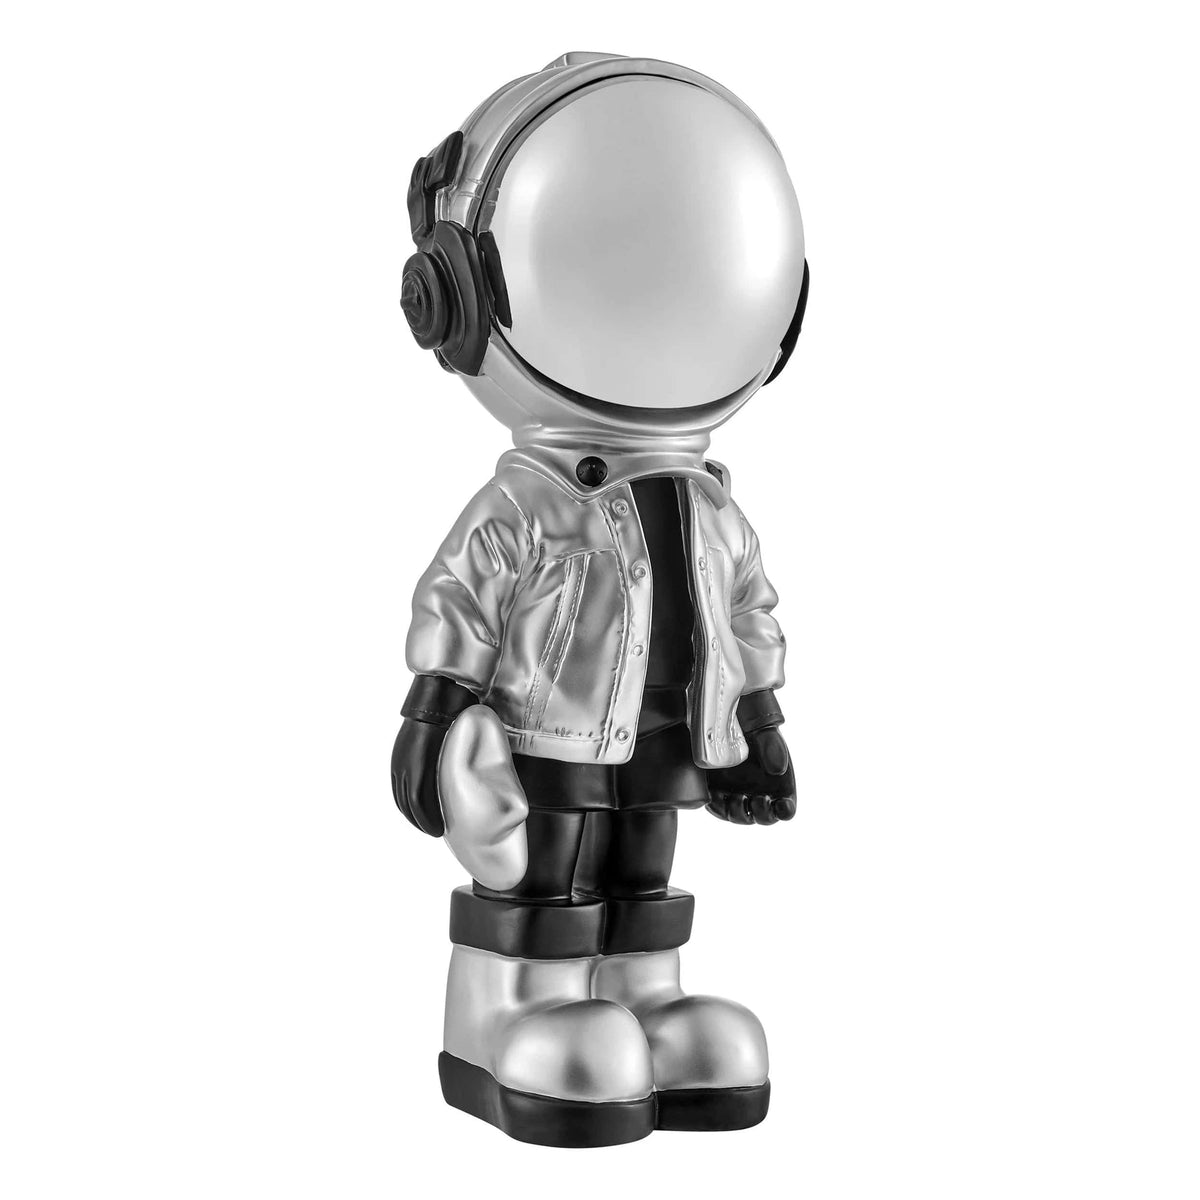 Hubble Takes the Stars Astronaut Sculpture in Black & Silver